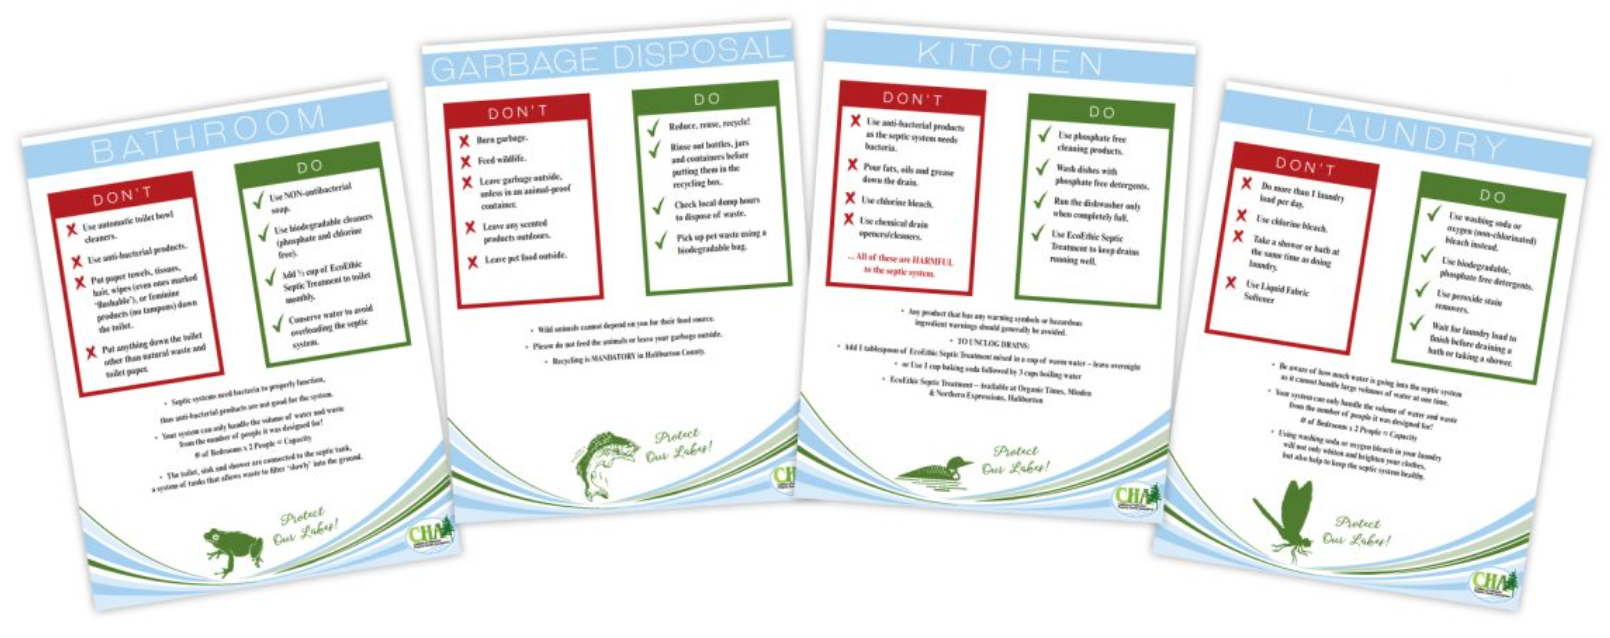 A sample array of cottage rental posters outlining safety for bathrooms, garbage disposal, kitchen and laundry areas.